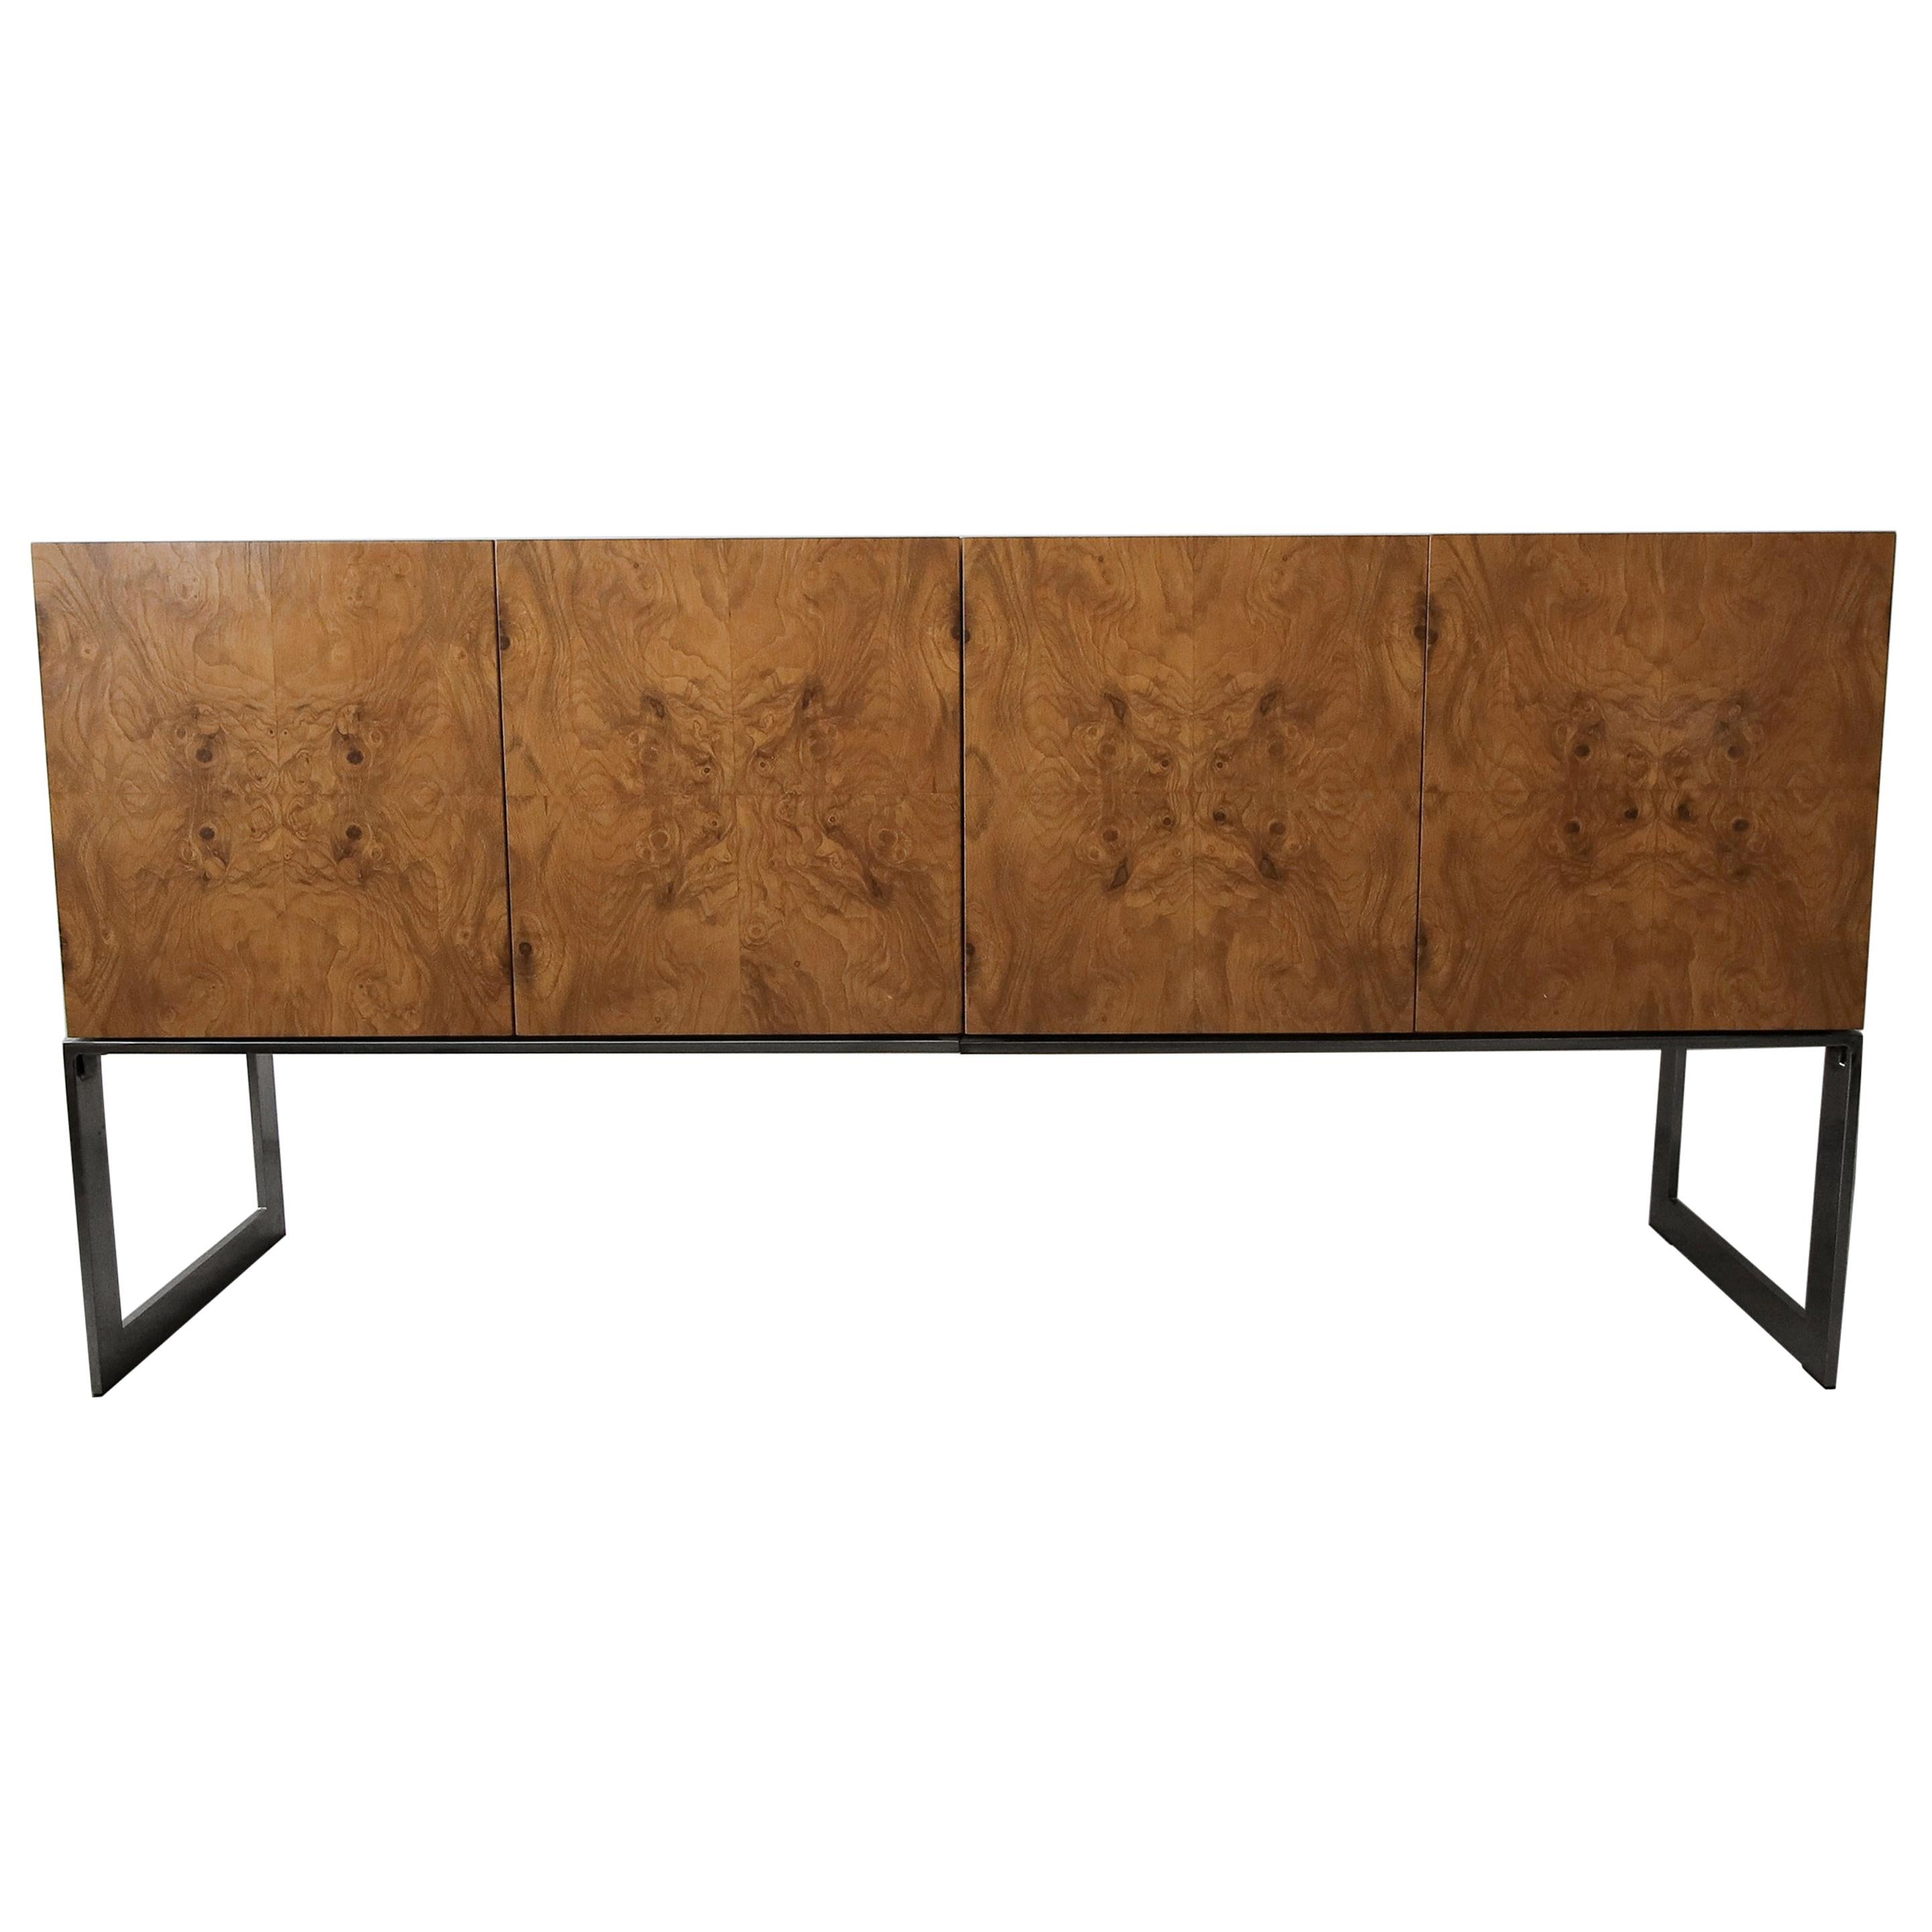 Midcentury Maple Burl and Chrome Credenza by Milo Baughman